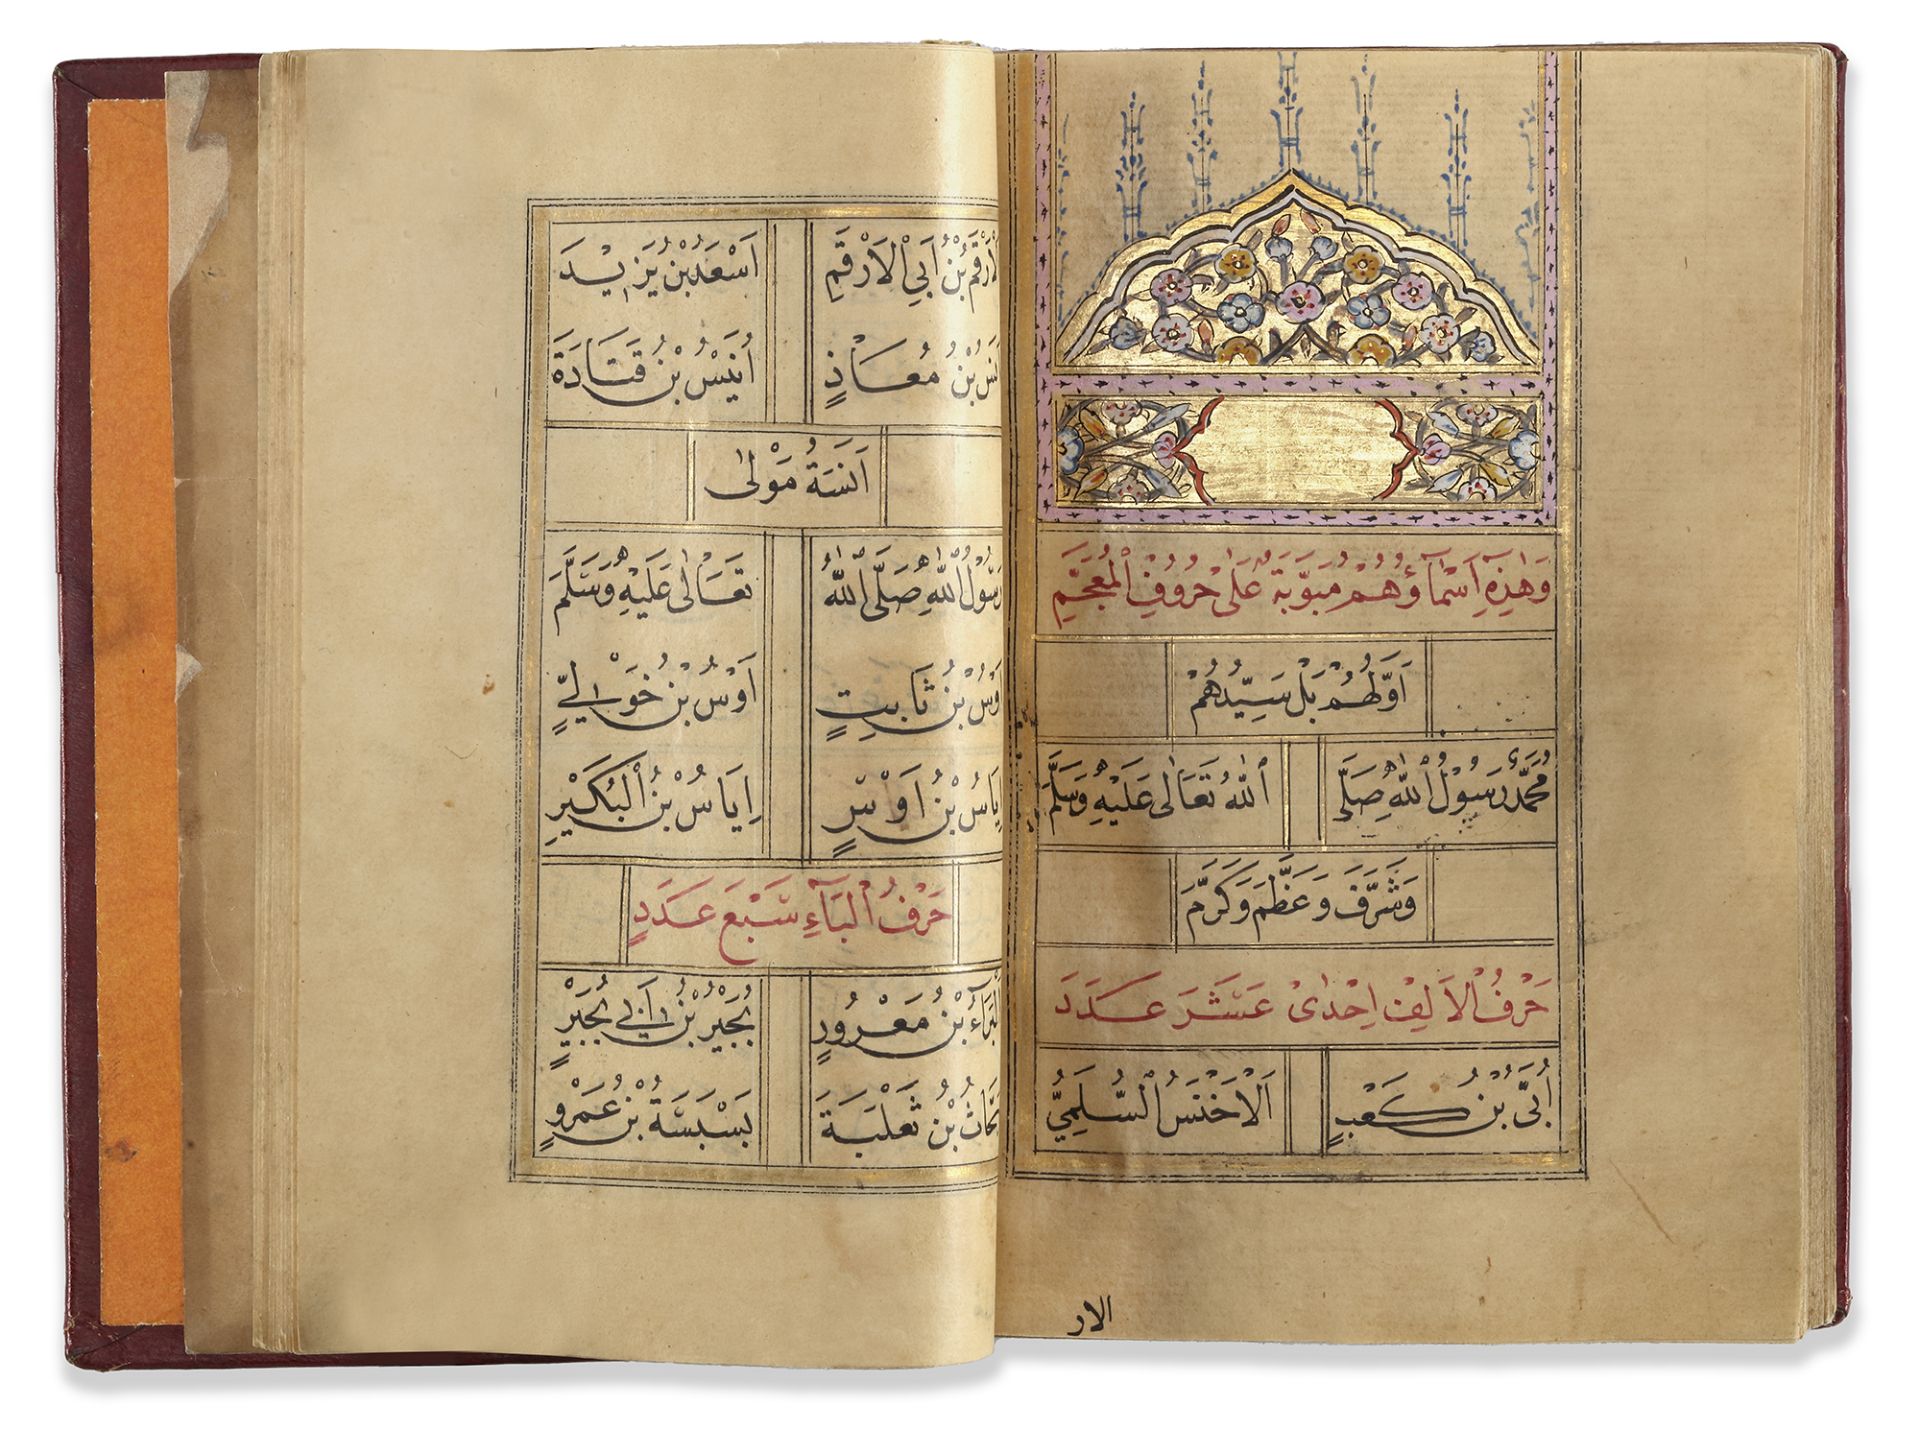 AN OTTOMAN PRAYER BOOK SIGNED BY IBRAHIM BERBERZADE, TURKEY, DATED 1179 AH/1765 AD - Image 2 of 6